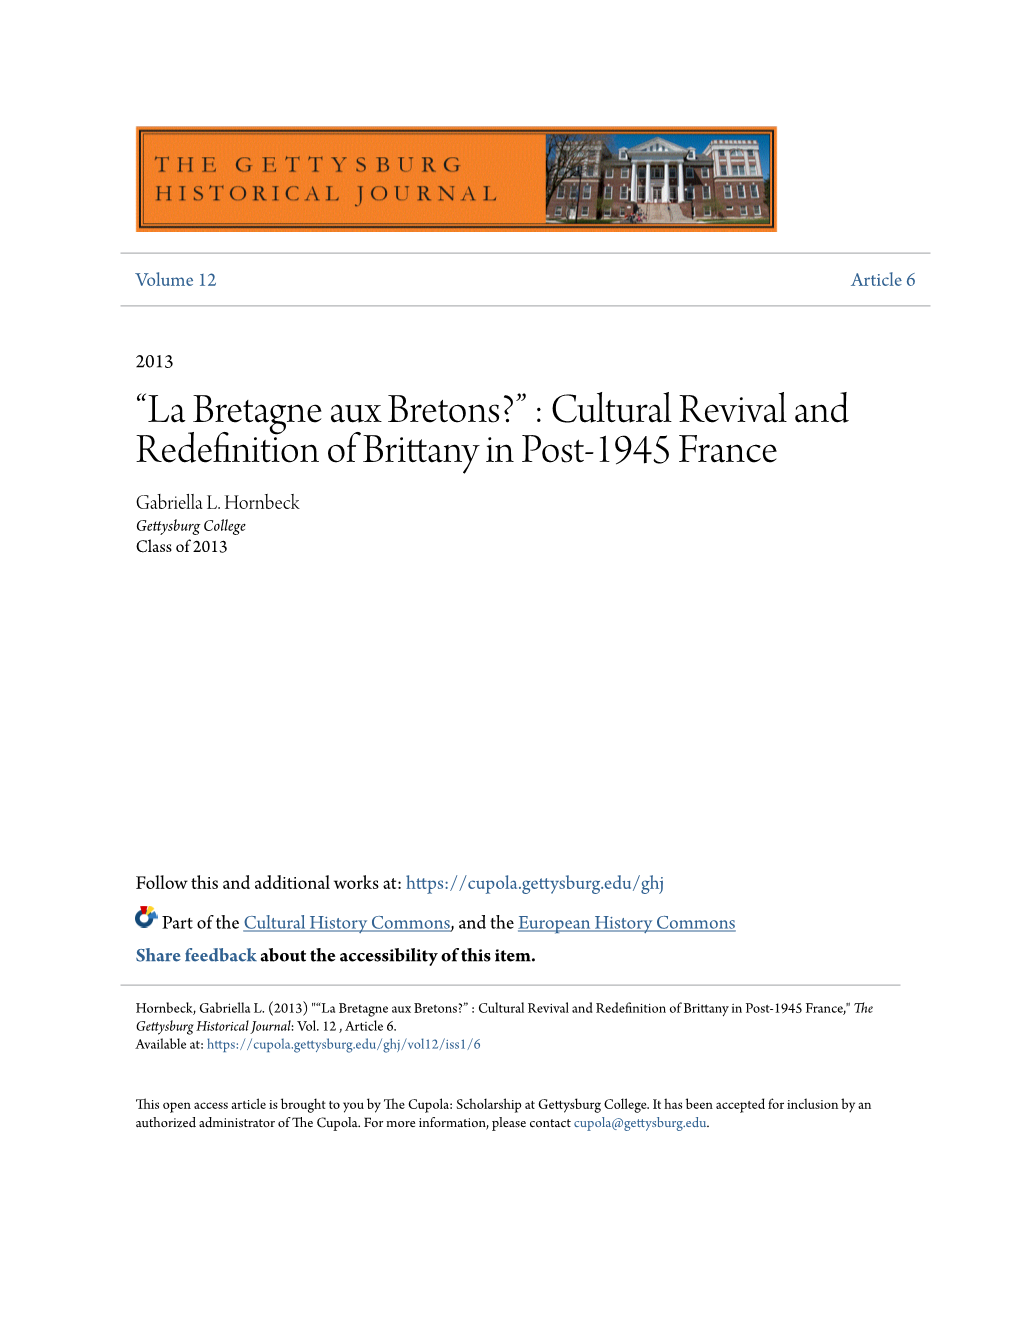 La Bretagne Aux Bretons?” : Cultural Revival and Redefinition of Brittany in Post-1945 France Gabriella L